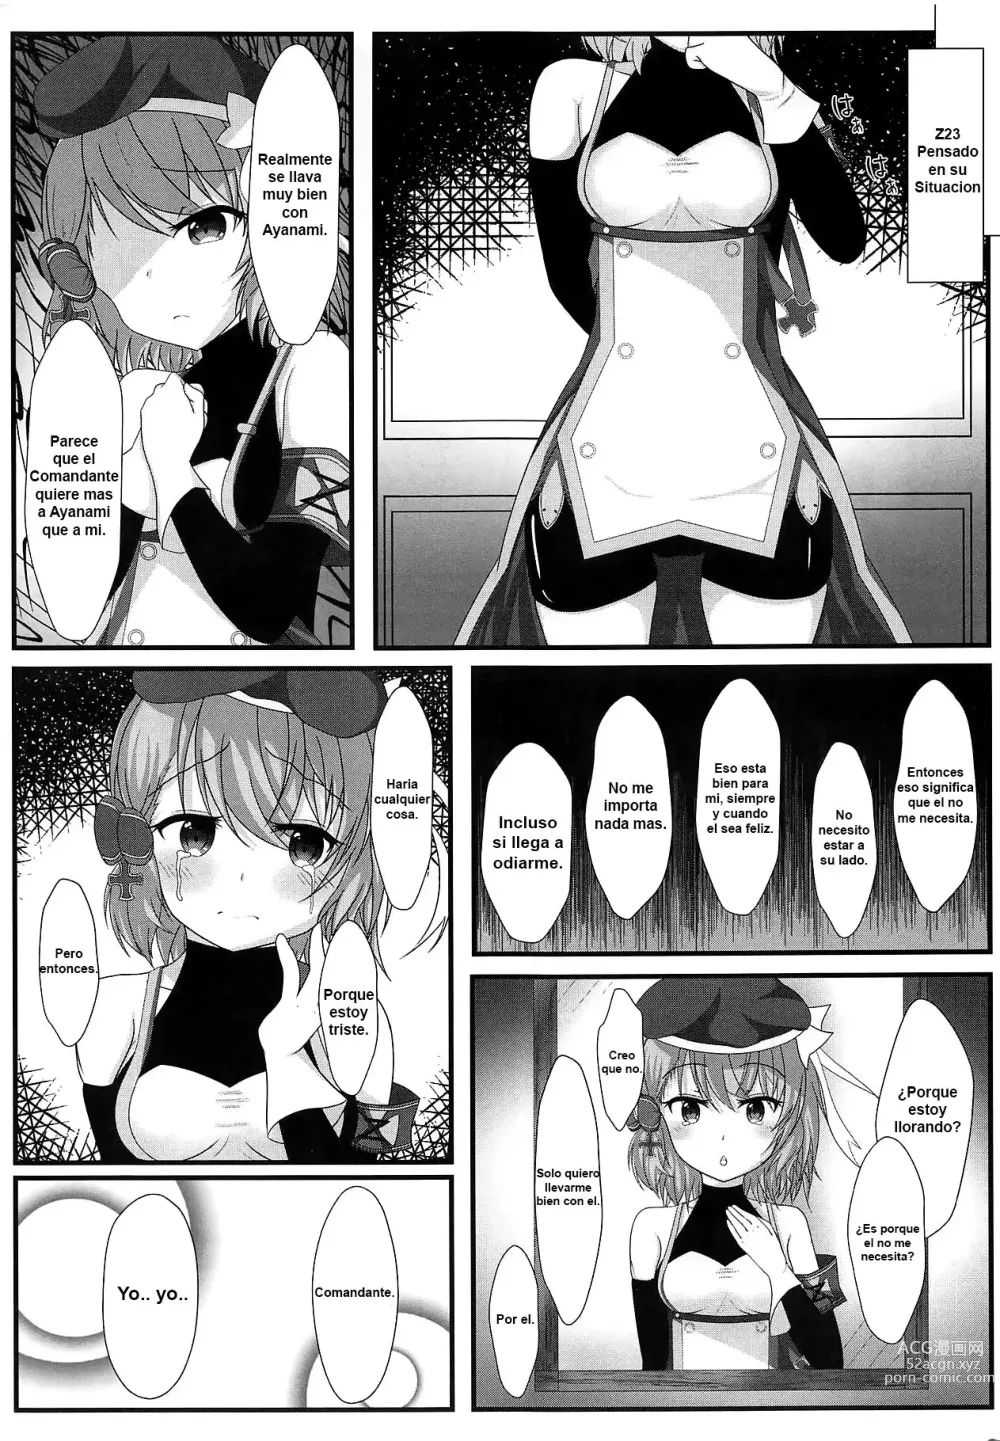 Page 5 of doujinshi My Commander is Truly a Lost Cause